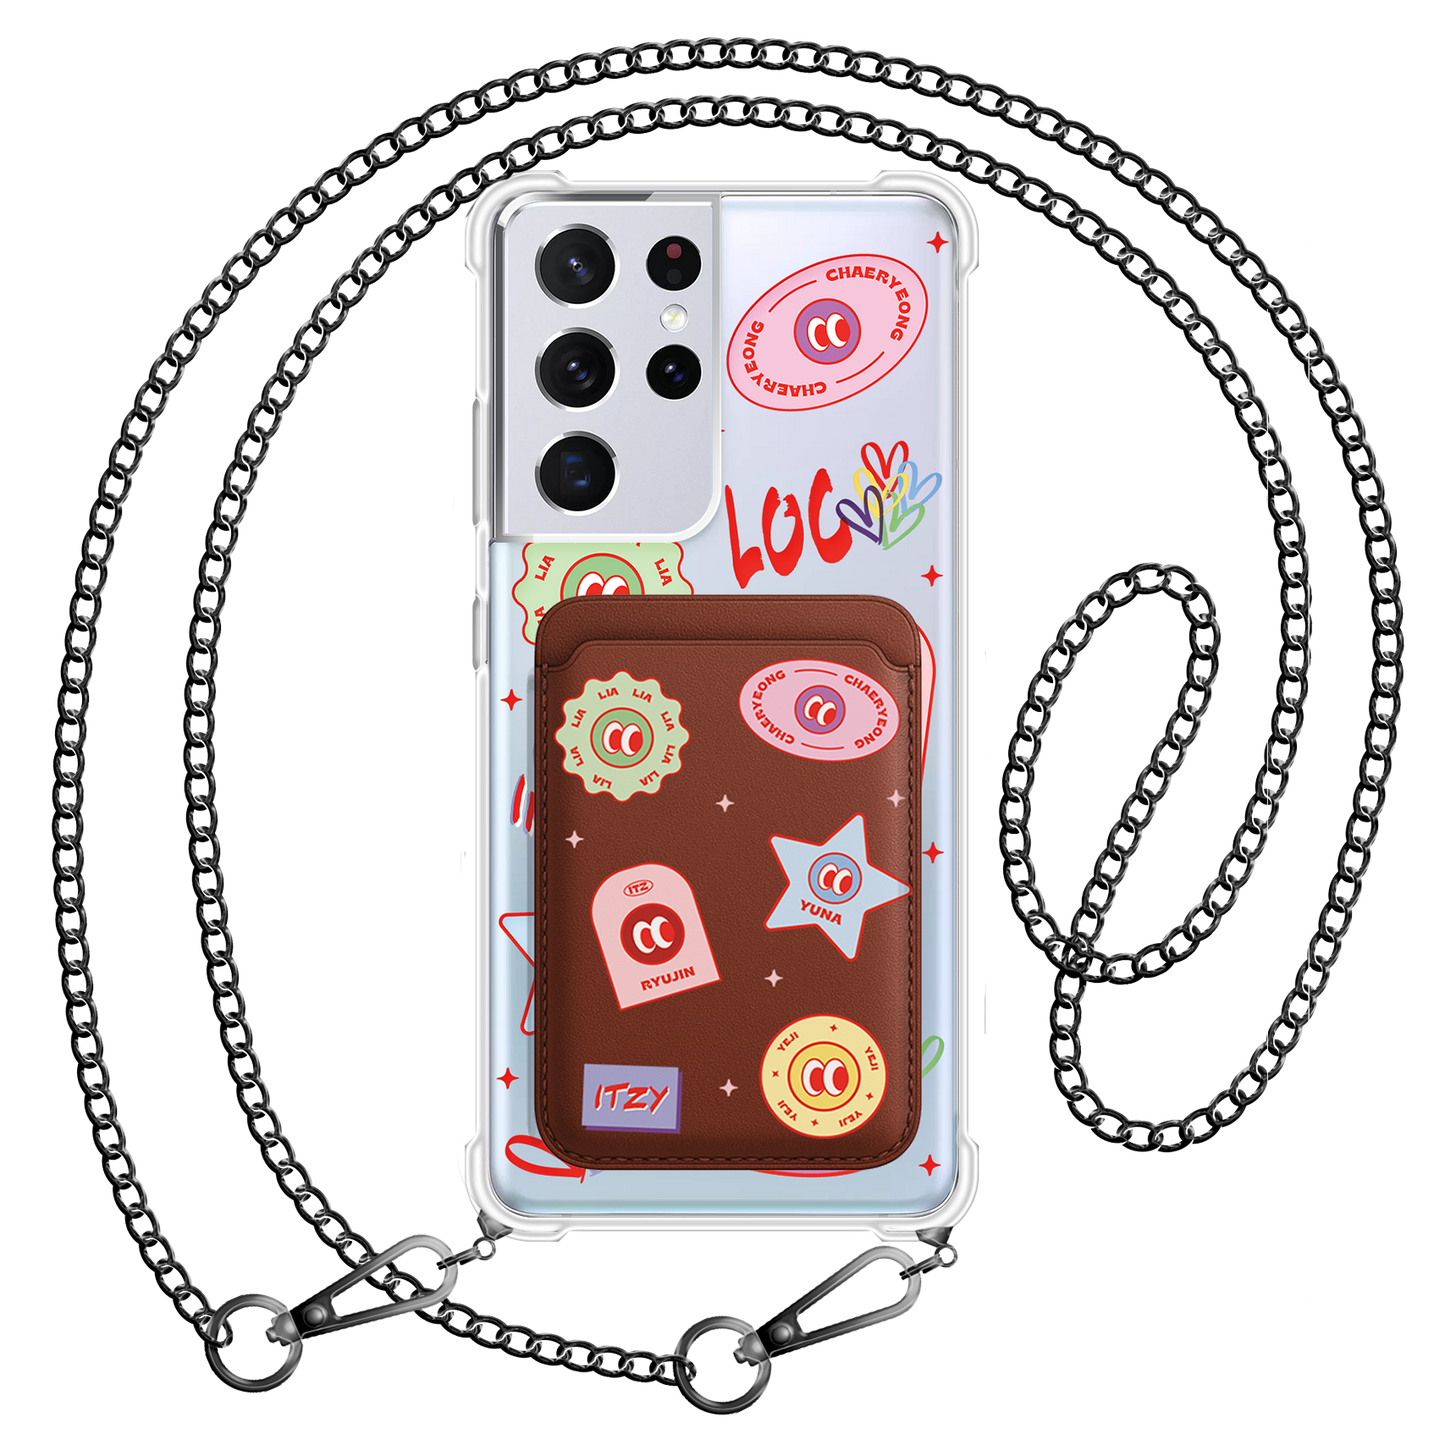 Android Magnetic Wallet Case - ITZY Sticker Pack